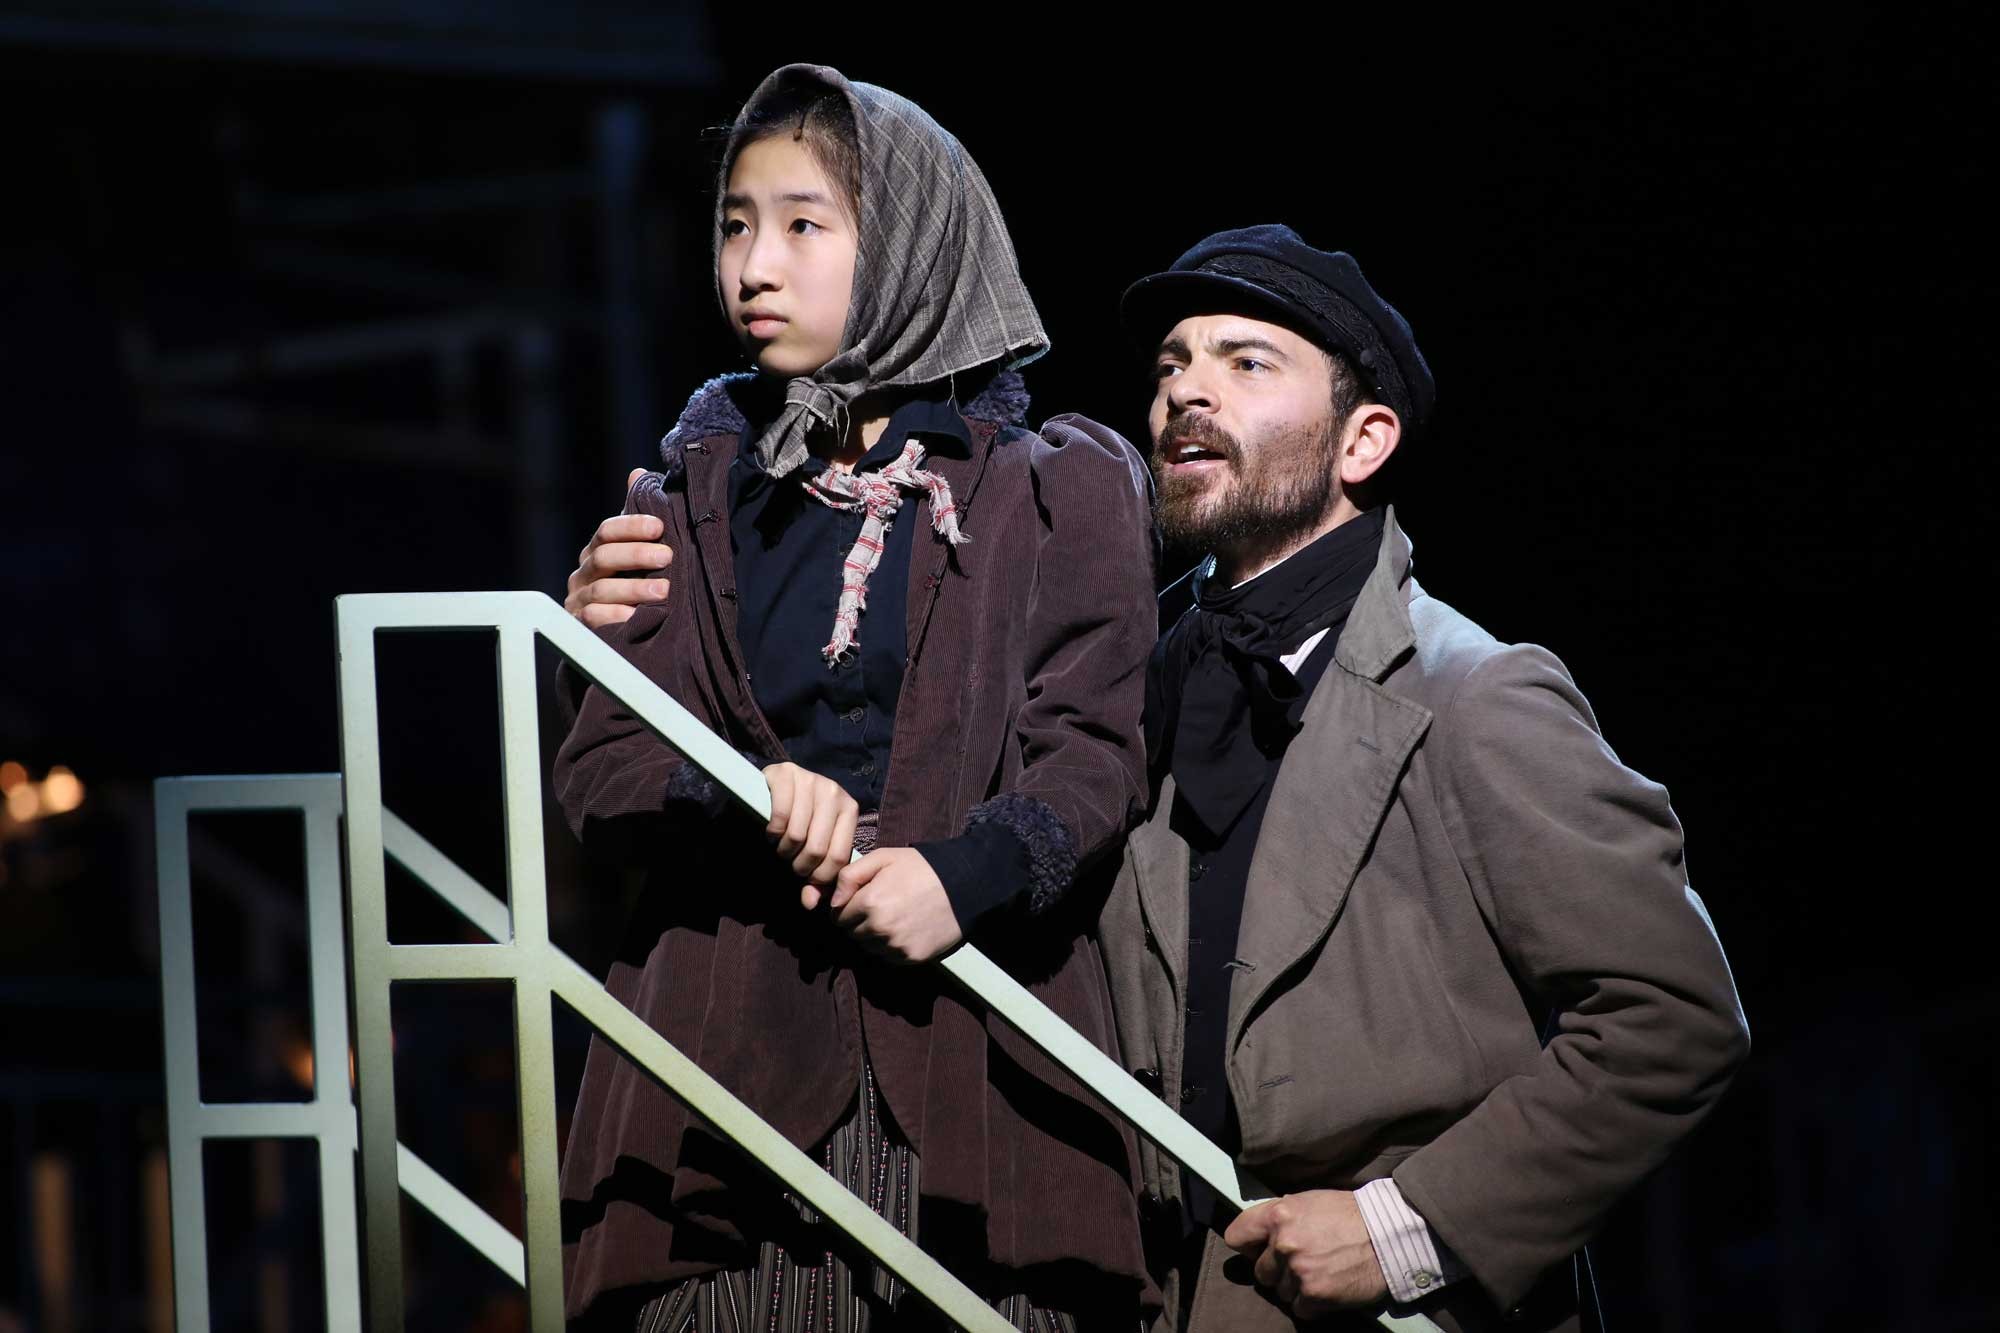 Photo of two actors: one man (Jonathan Atkinson) and one young girl (Dulcey Pham). They are dressed as Jewish immigrants in modest clothing. The young girl wears a headscarf. They are standing near a retail kiosk where the man sells silhouette portraits. Image is from the Ford's production of "Ragtime."  